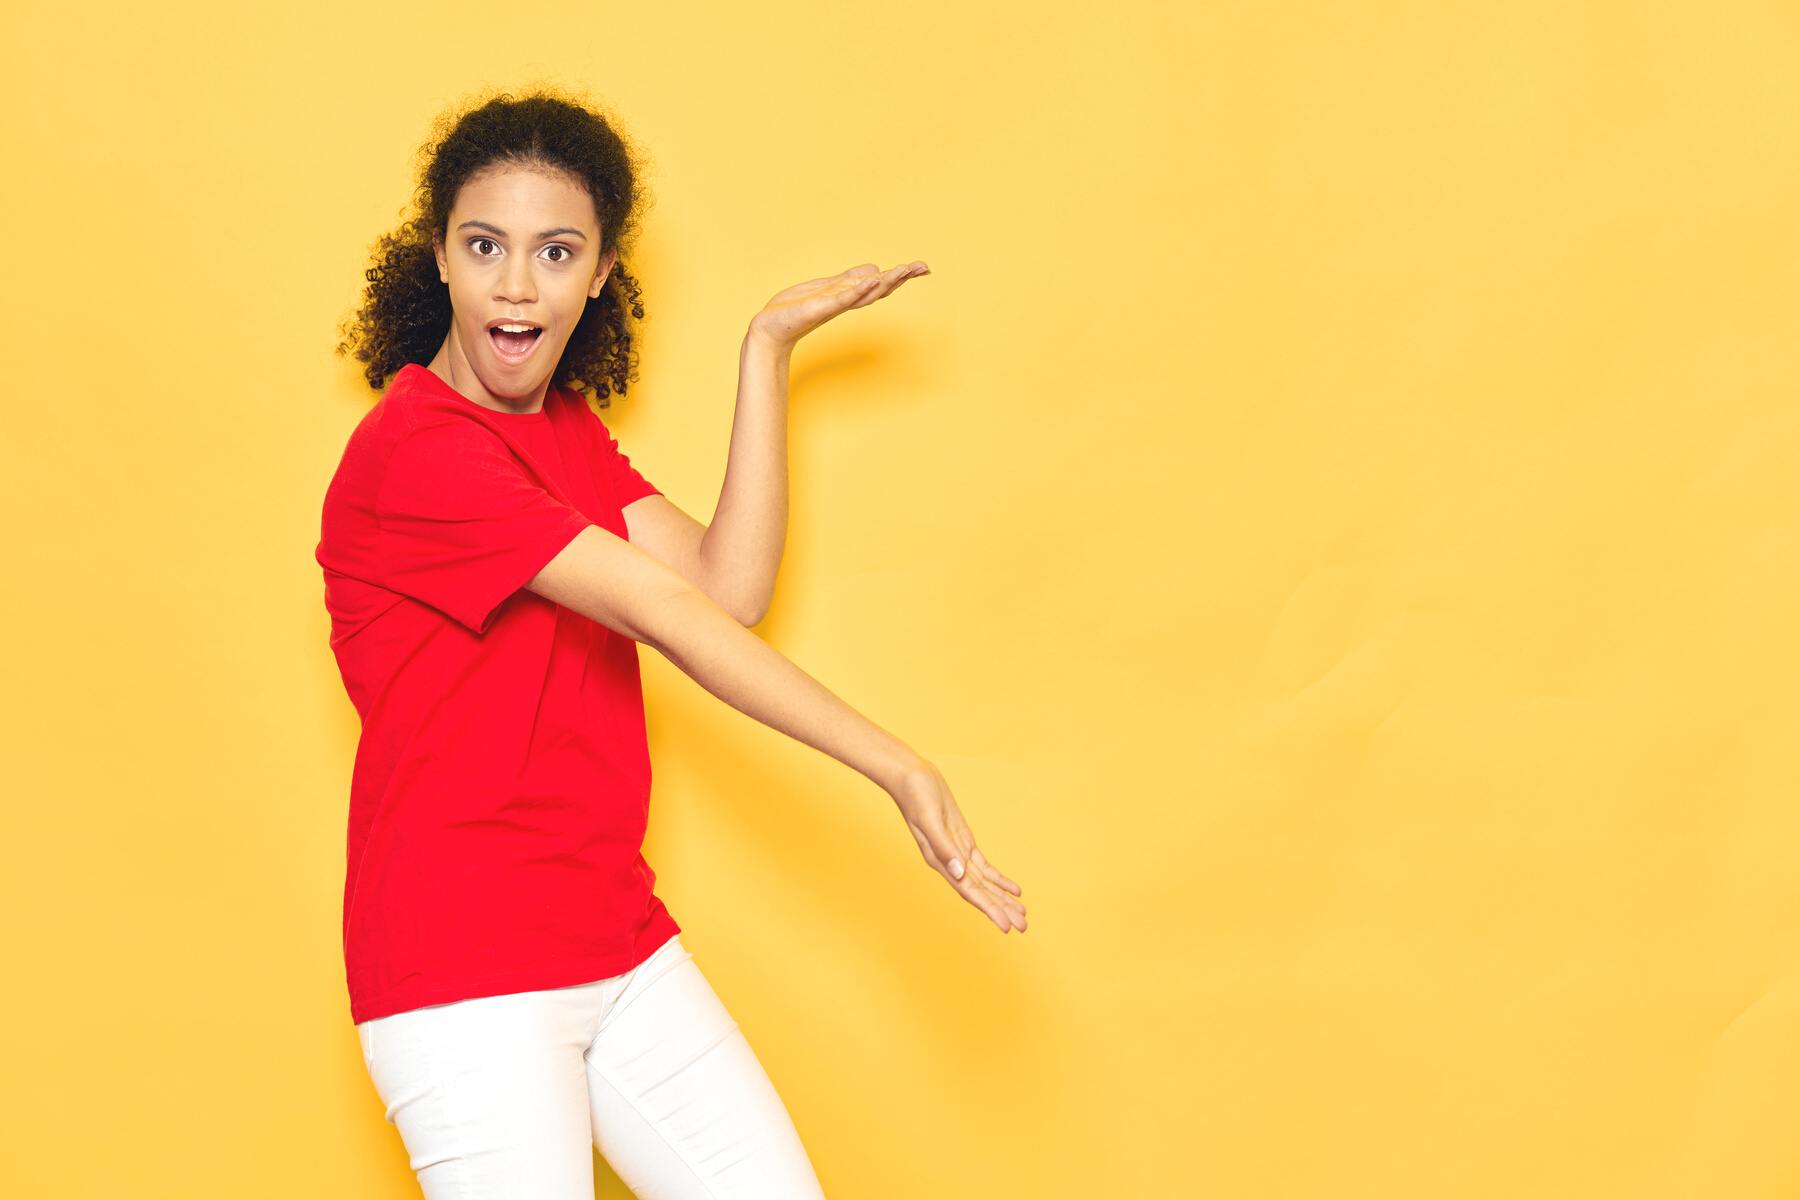 Pretty Woman with Curly Hair in a Red T-Shirt on a Yellow Background Gesture with Her Hands